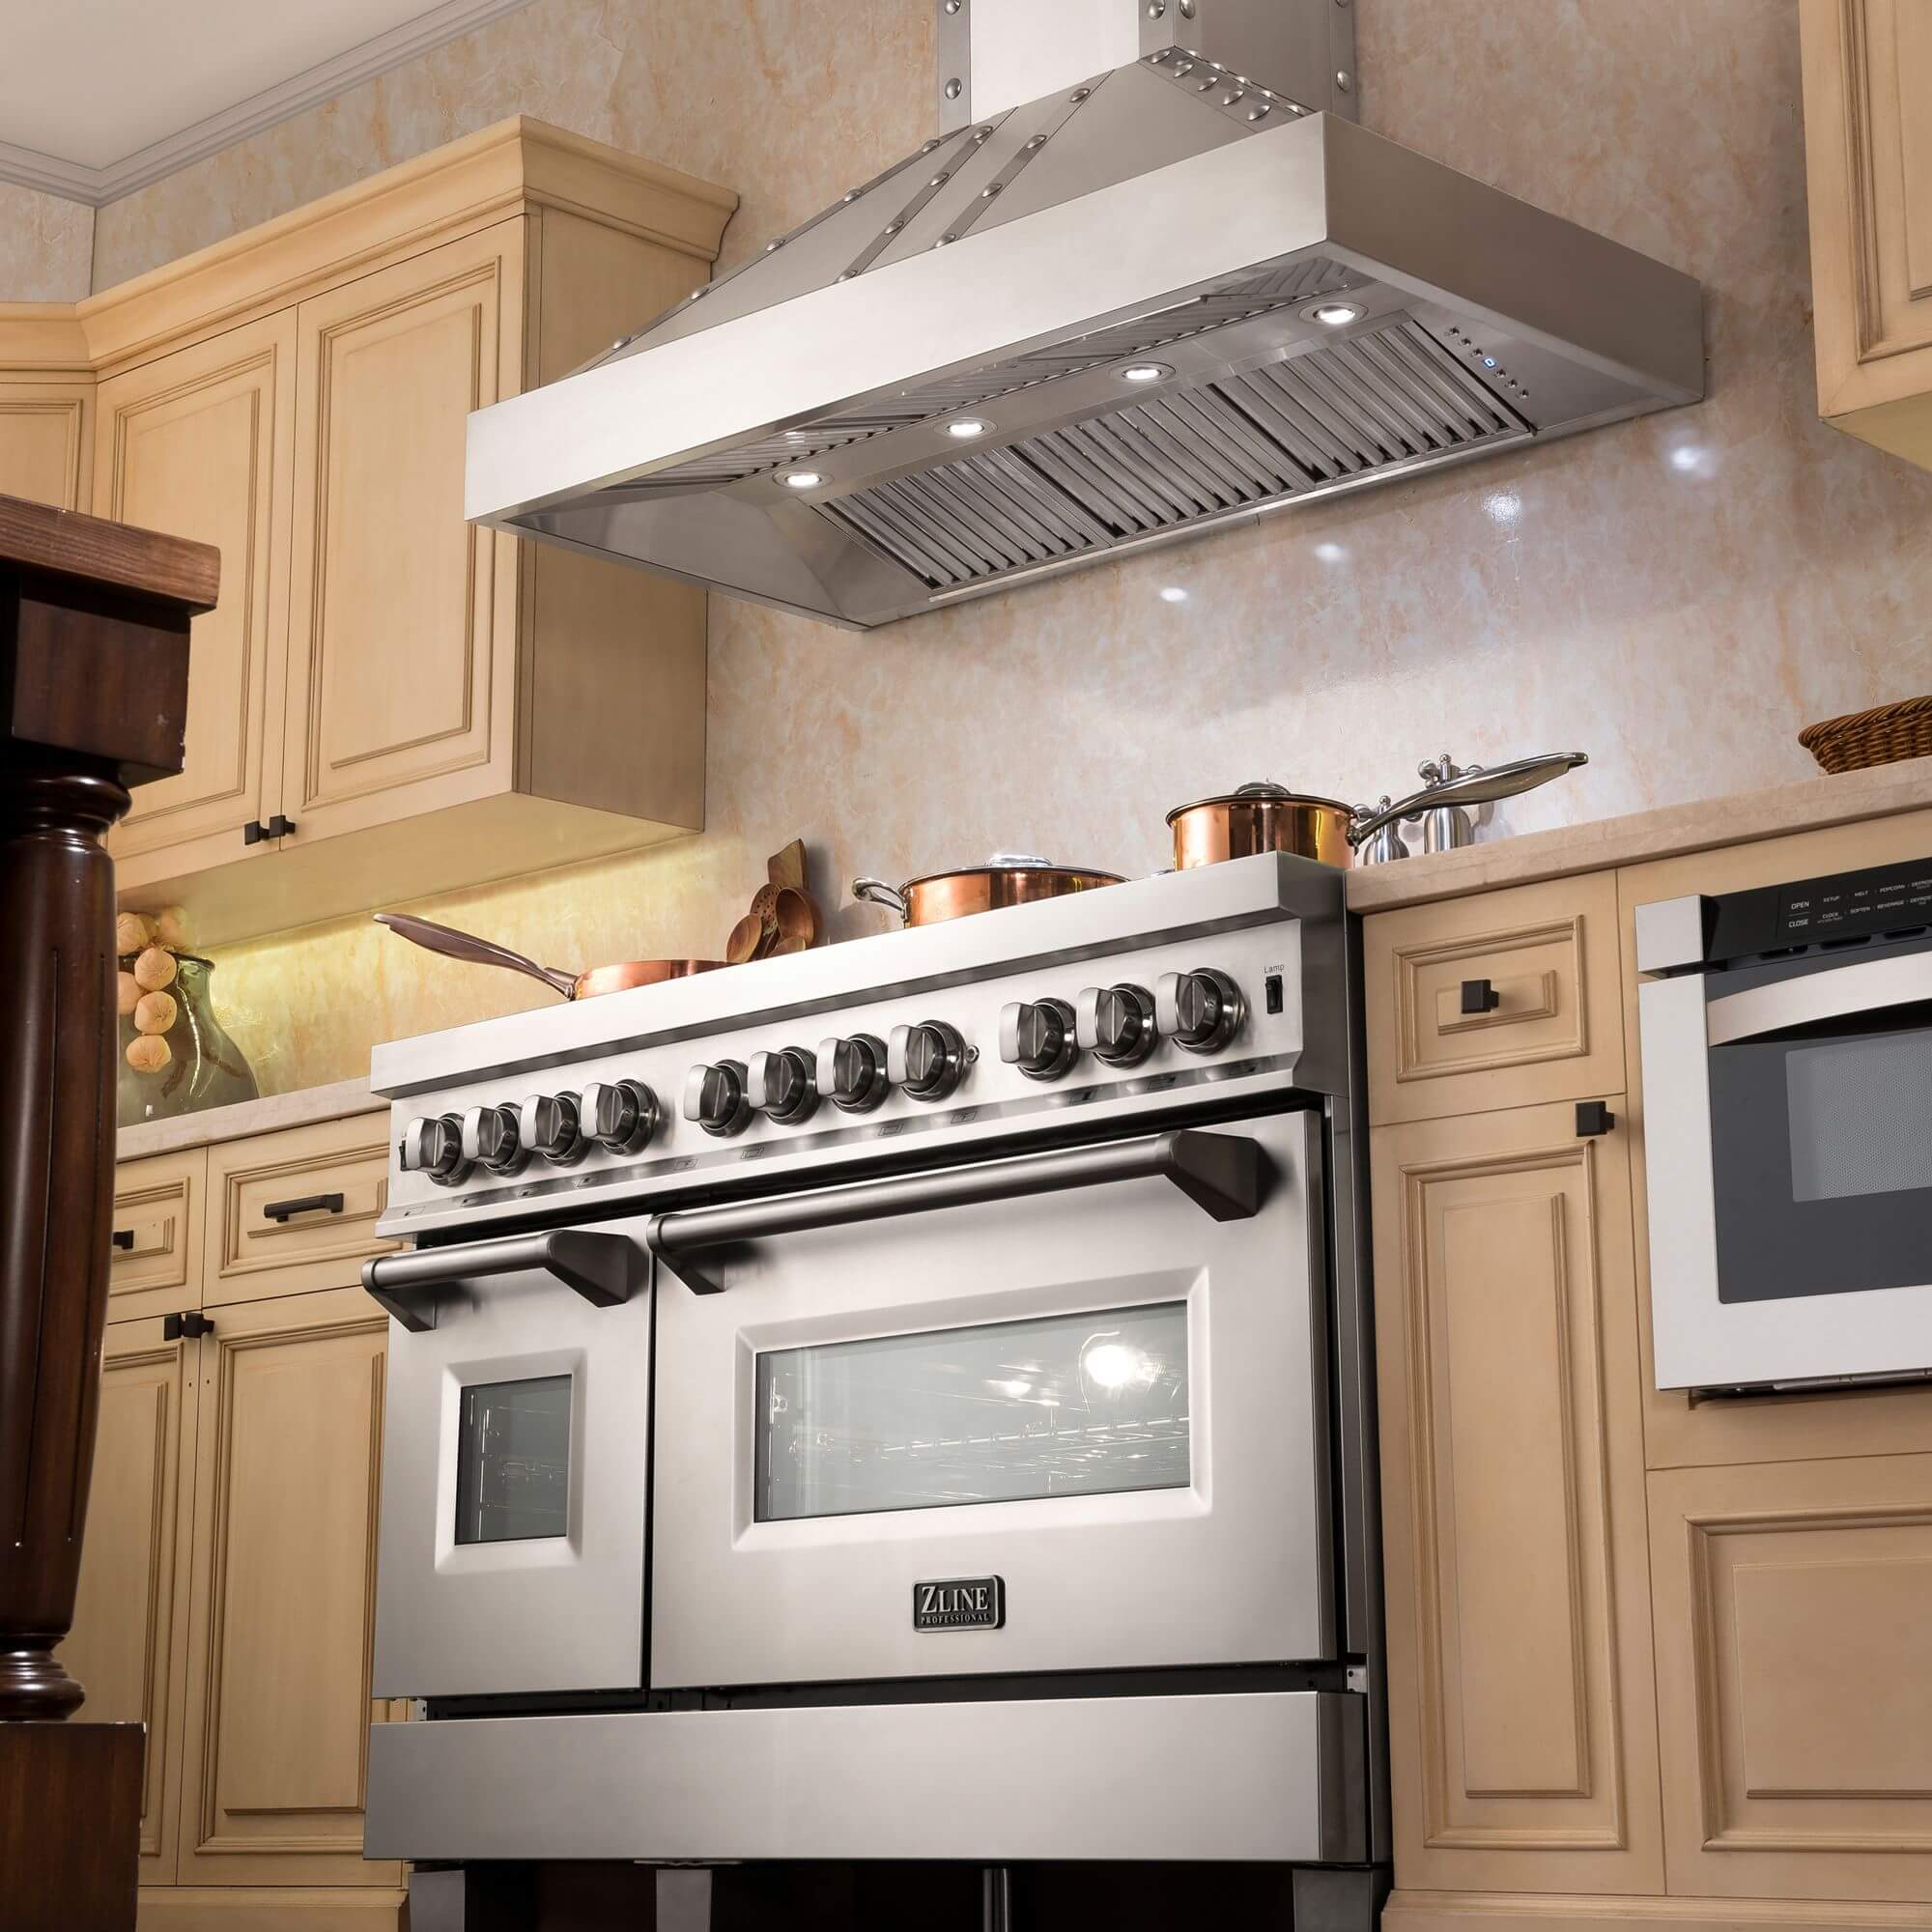 ZLINE Designer Series Wall Mount Range Hood in DuraSnow Stainless Steel with Nailhead Rivets (655-4SSSS) above a double oven range in a luxury kitchen.